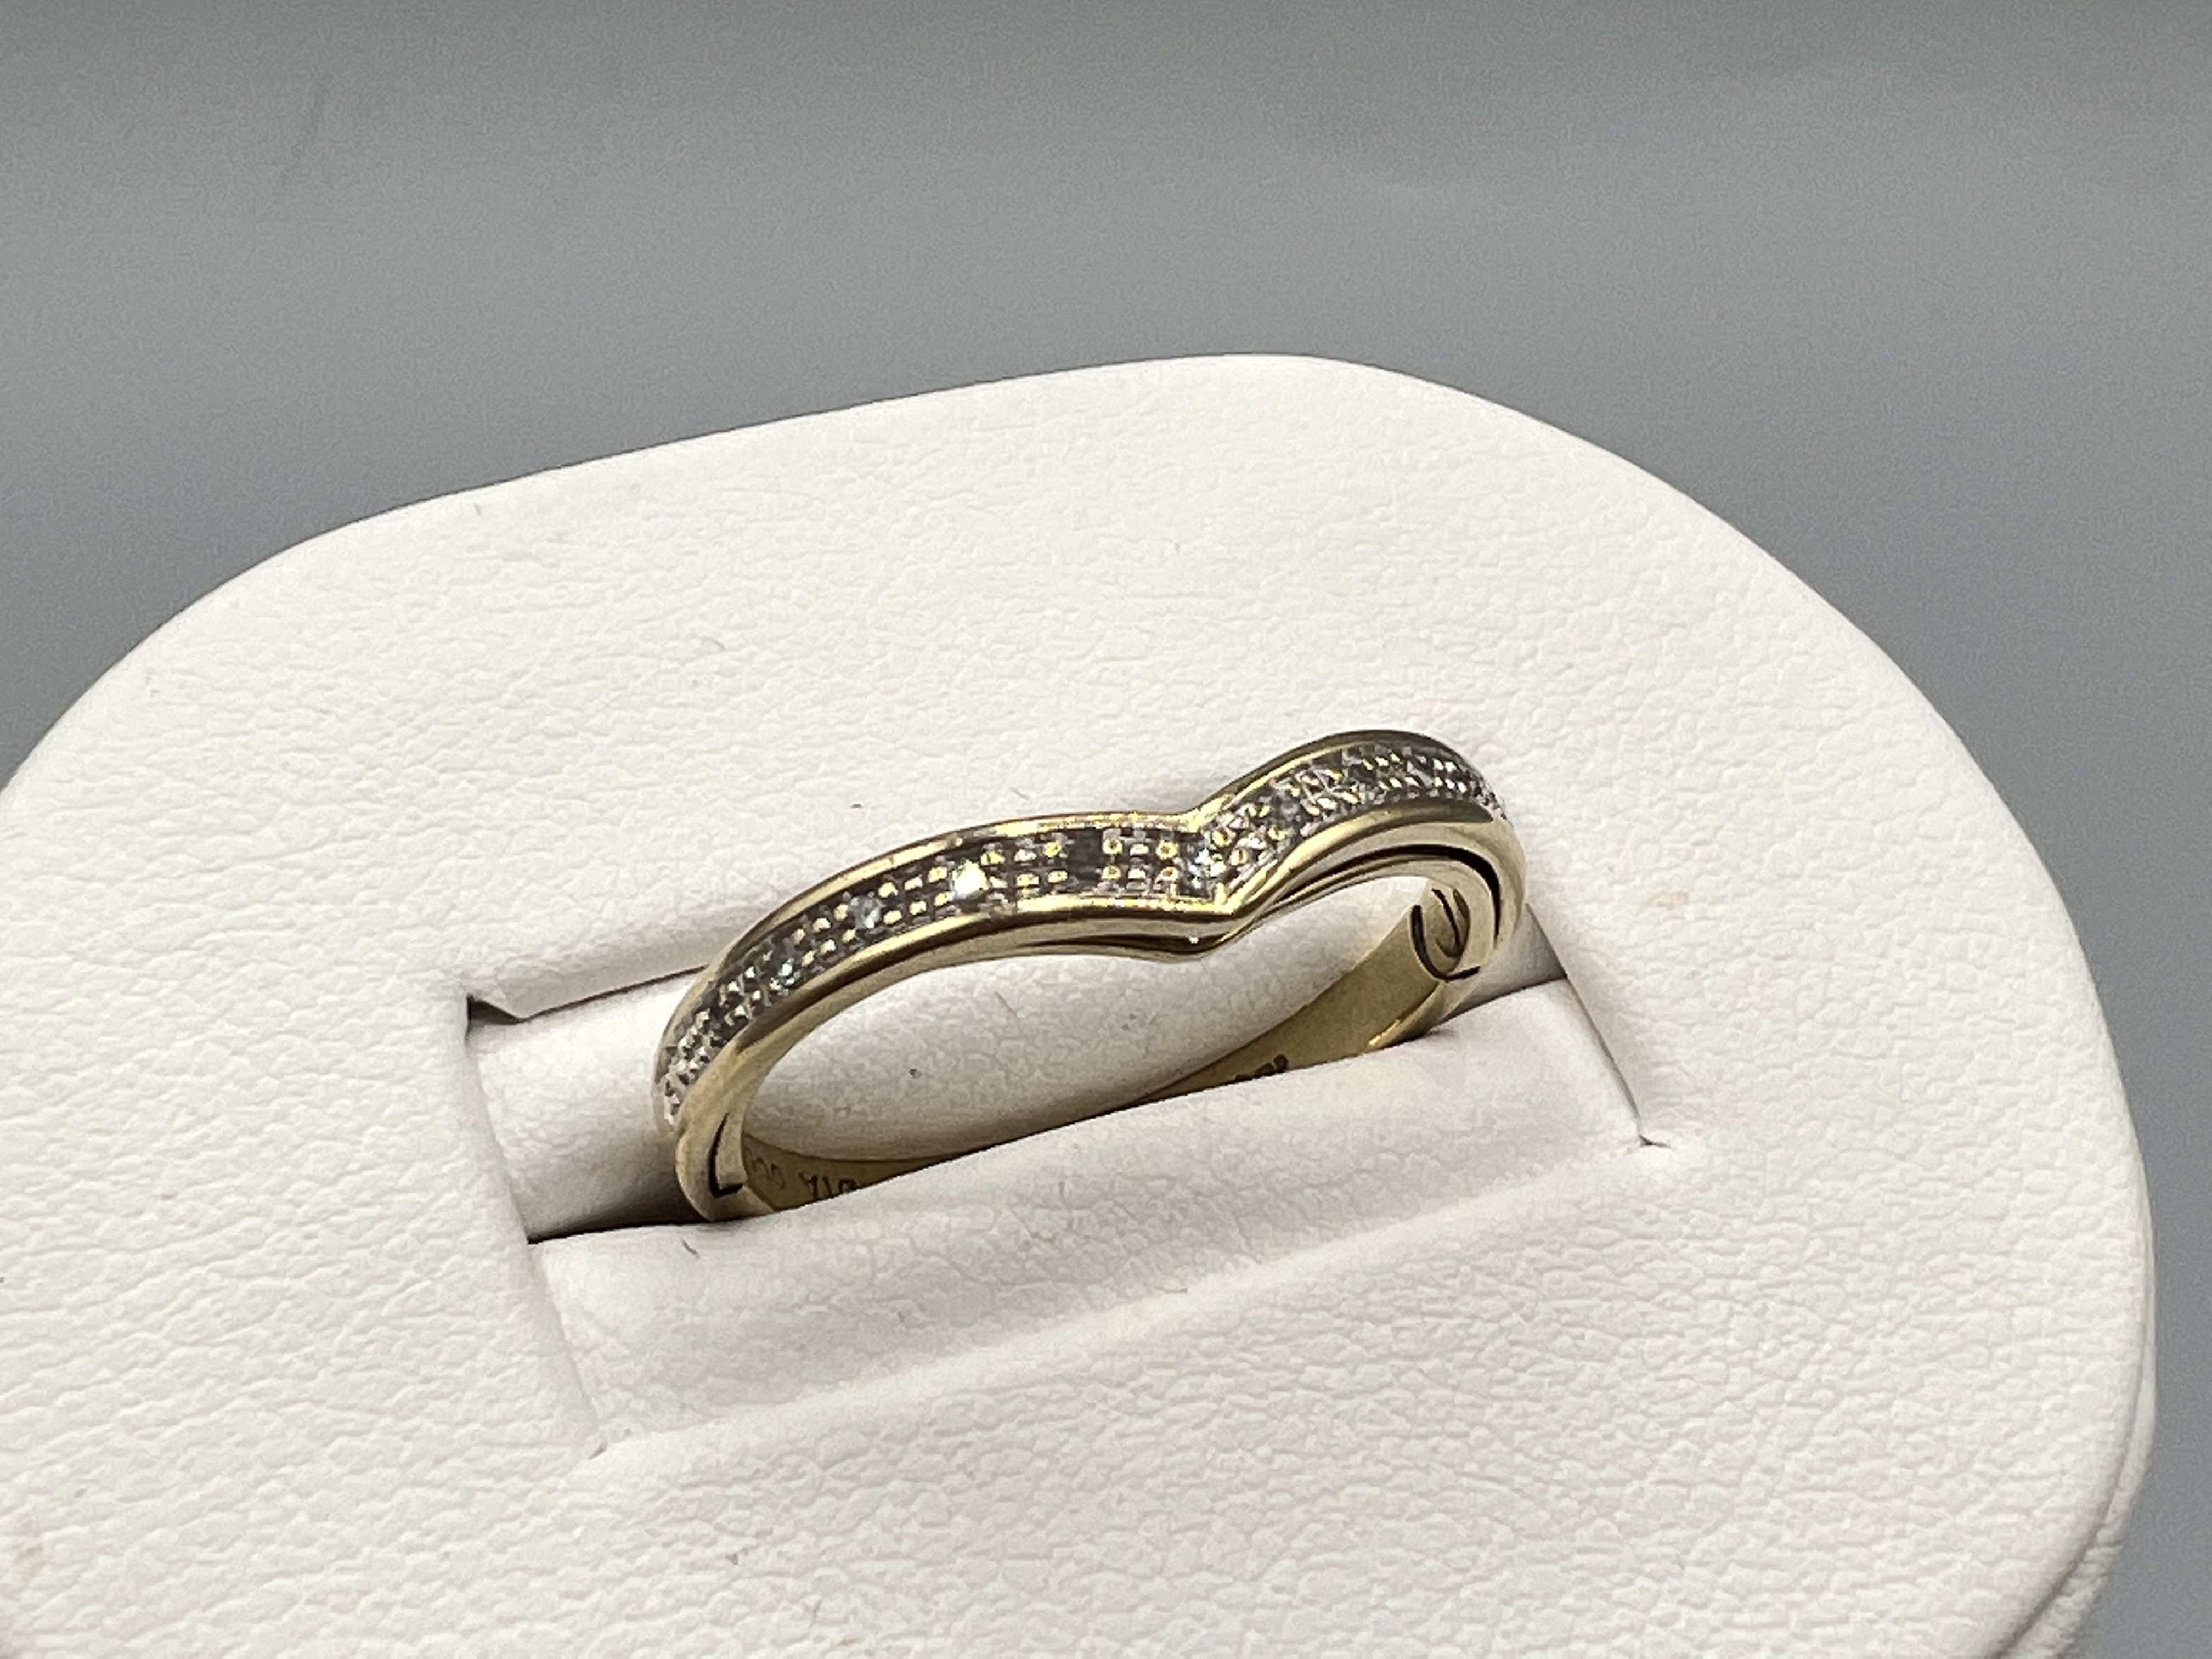 9ct Gold & Diamond Secret Message "I love you ring" - Size N - 2.2 grams - Image 2 of 3